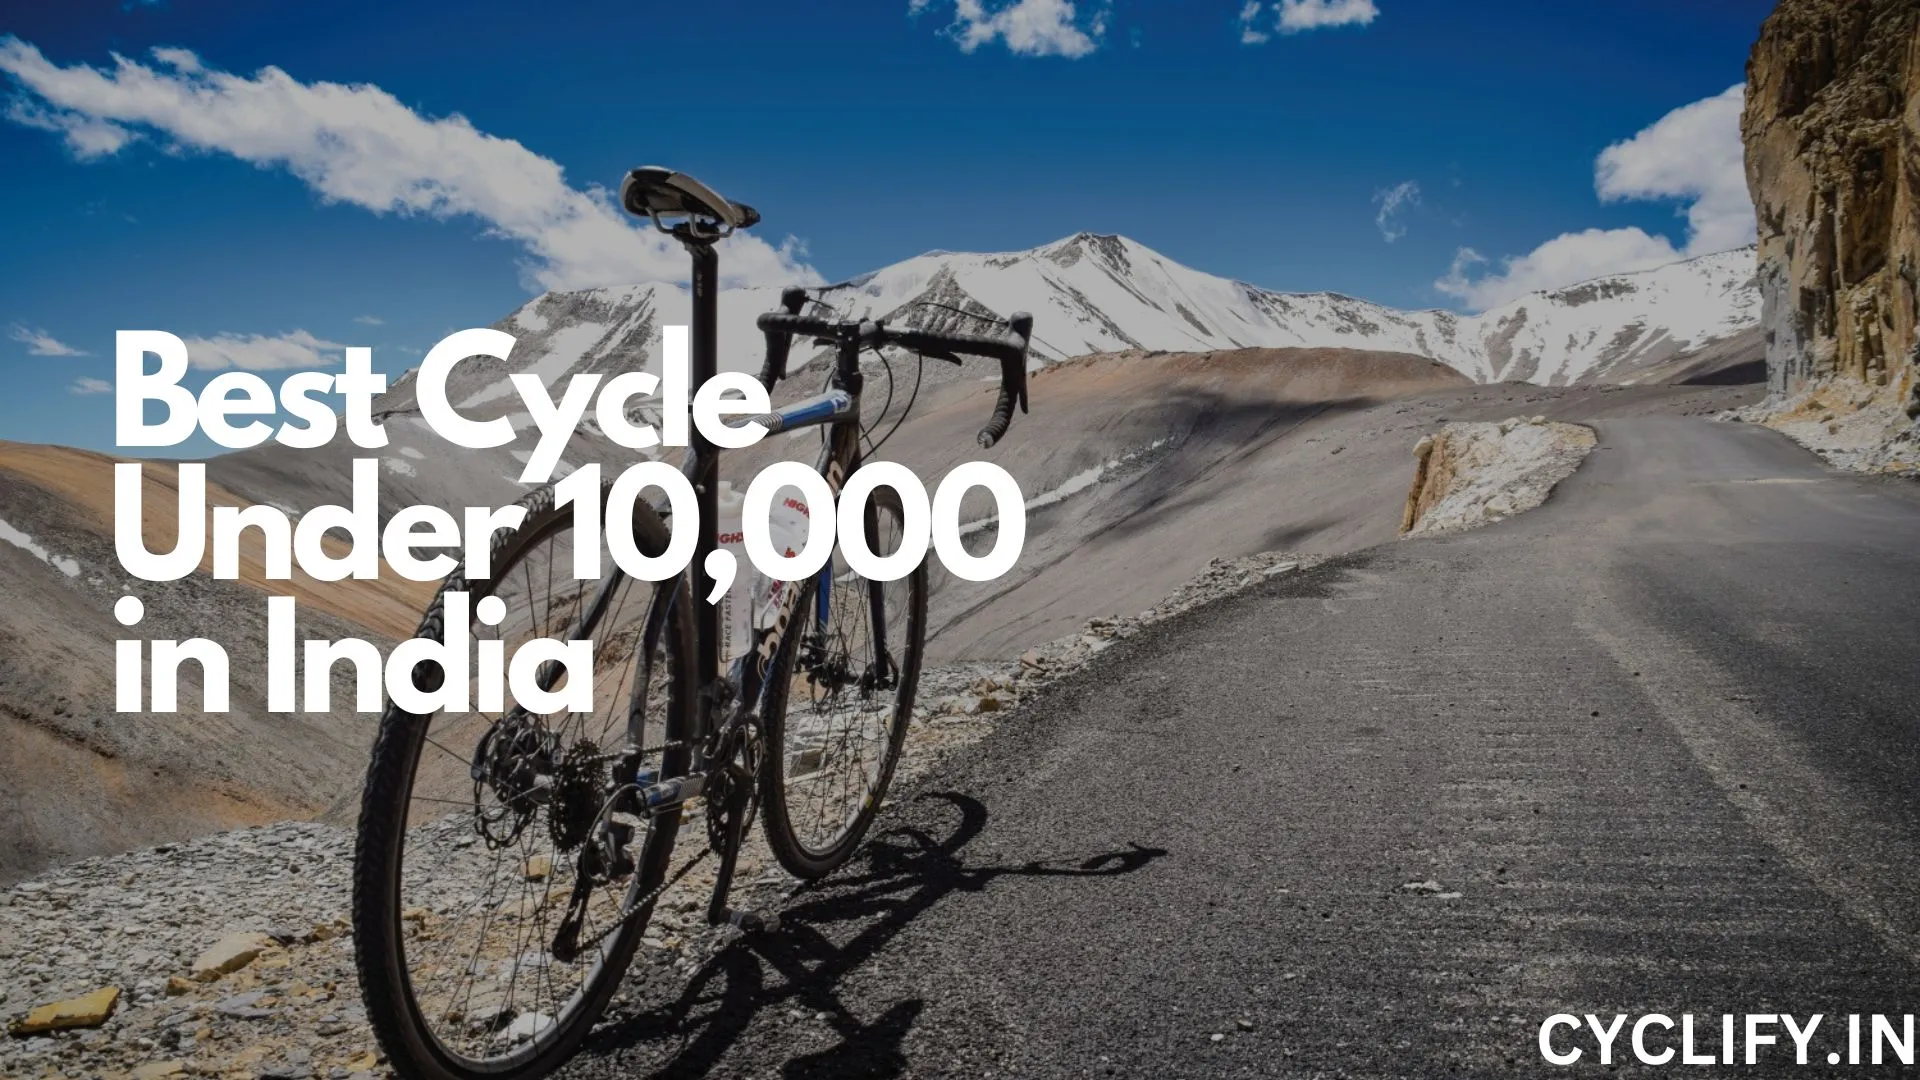 Best Cycle under 10000 in India - An illustration of a girl riding a bike